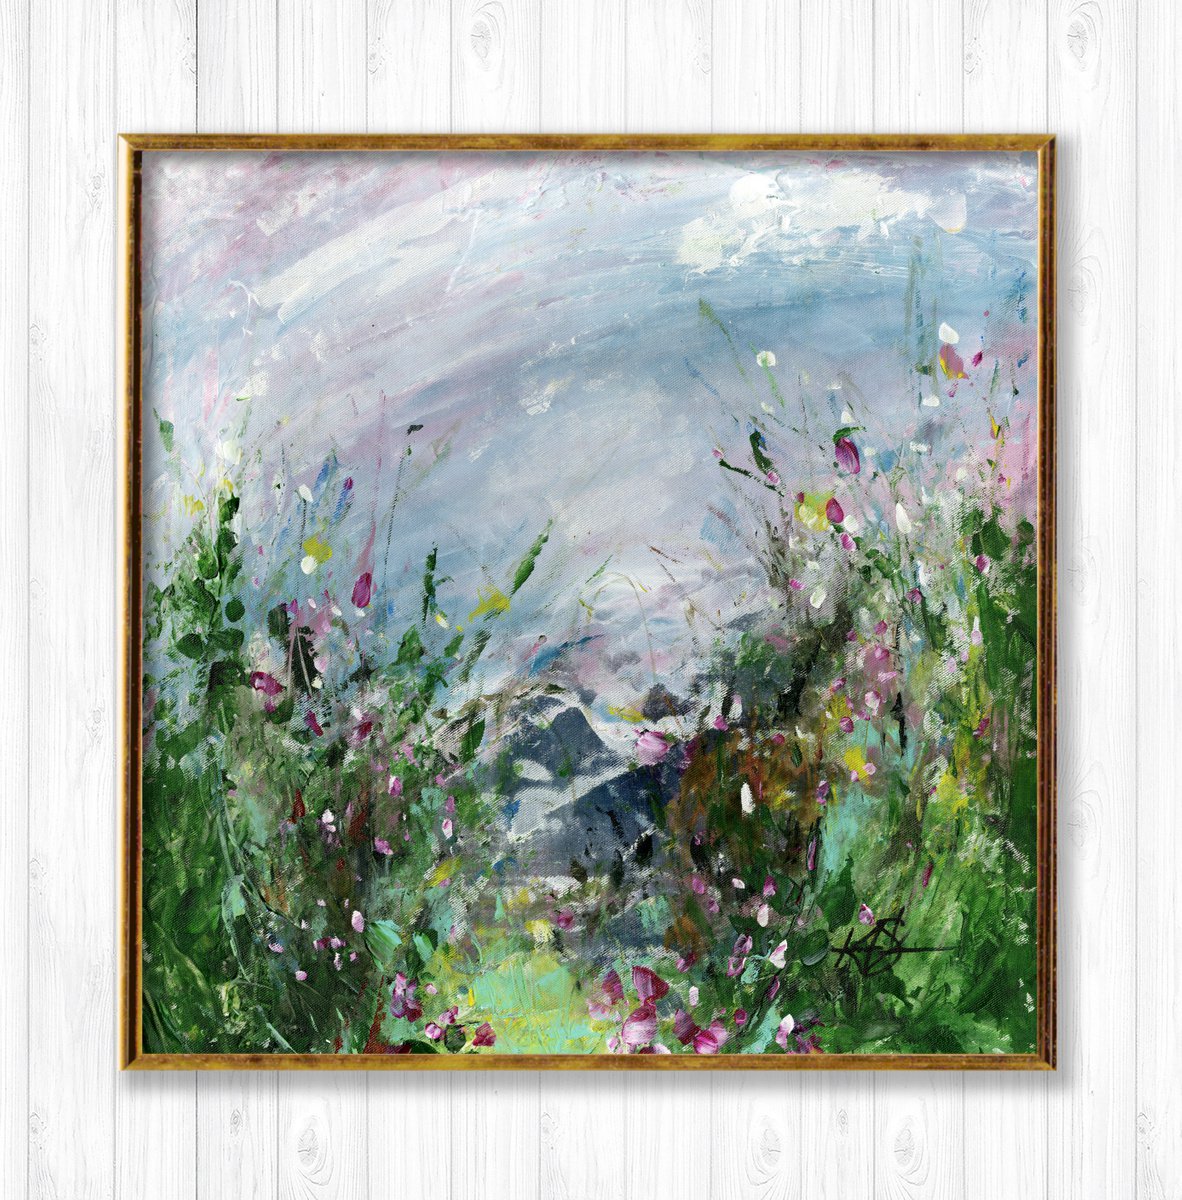 A Meadow Journey - Framed Floral Painting by Kathy Morton Stanion by Kathy Morton Stanion